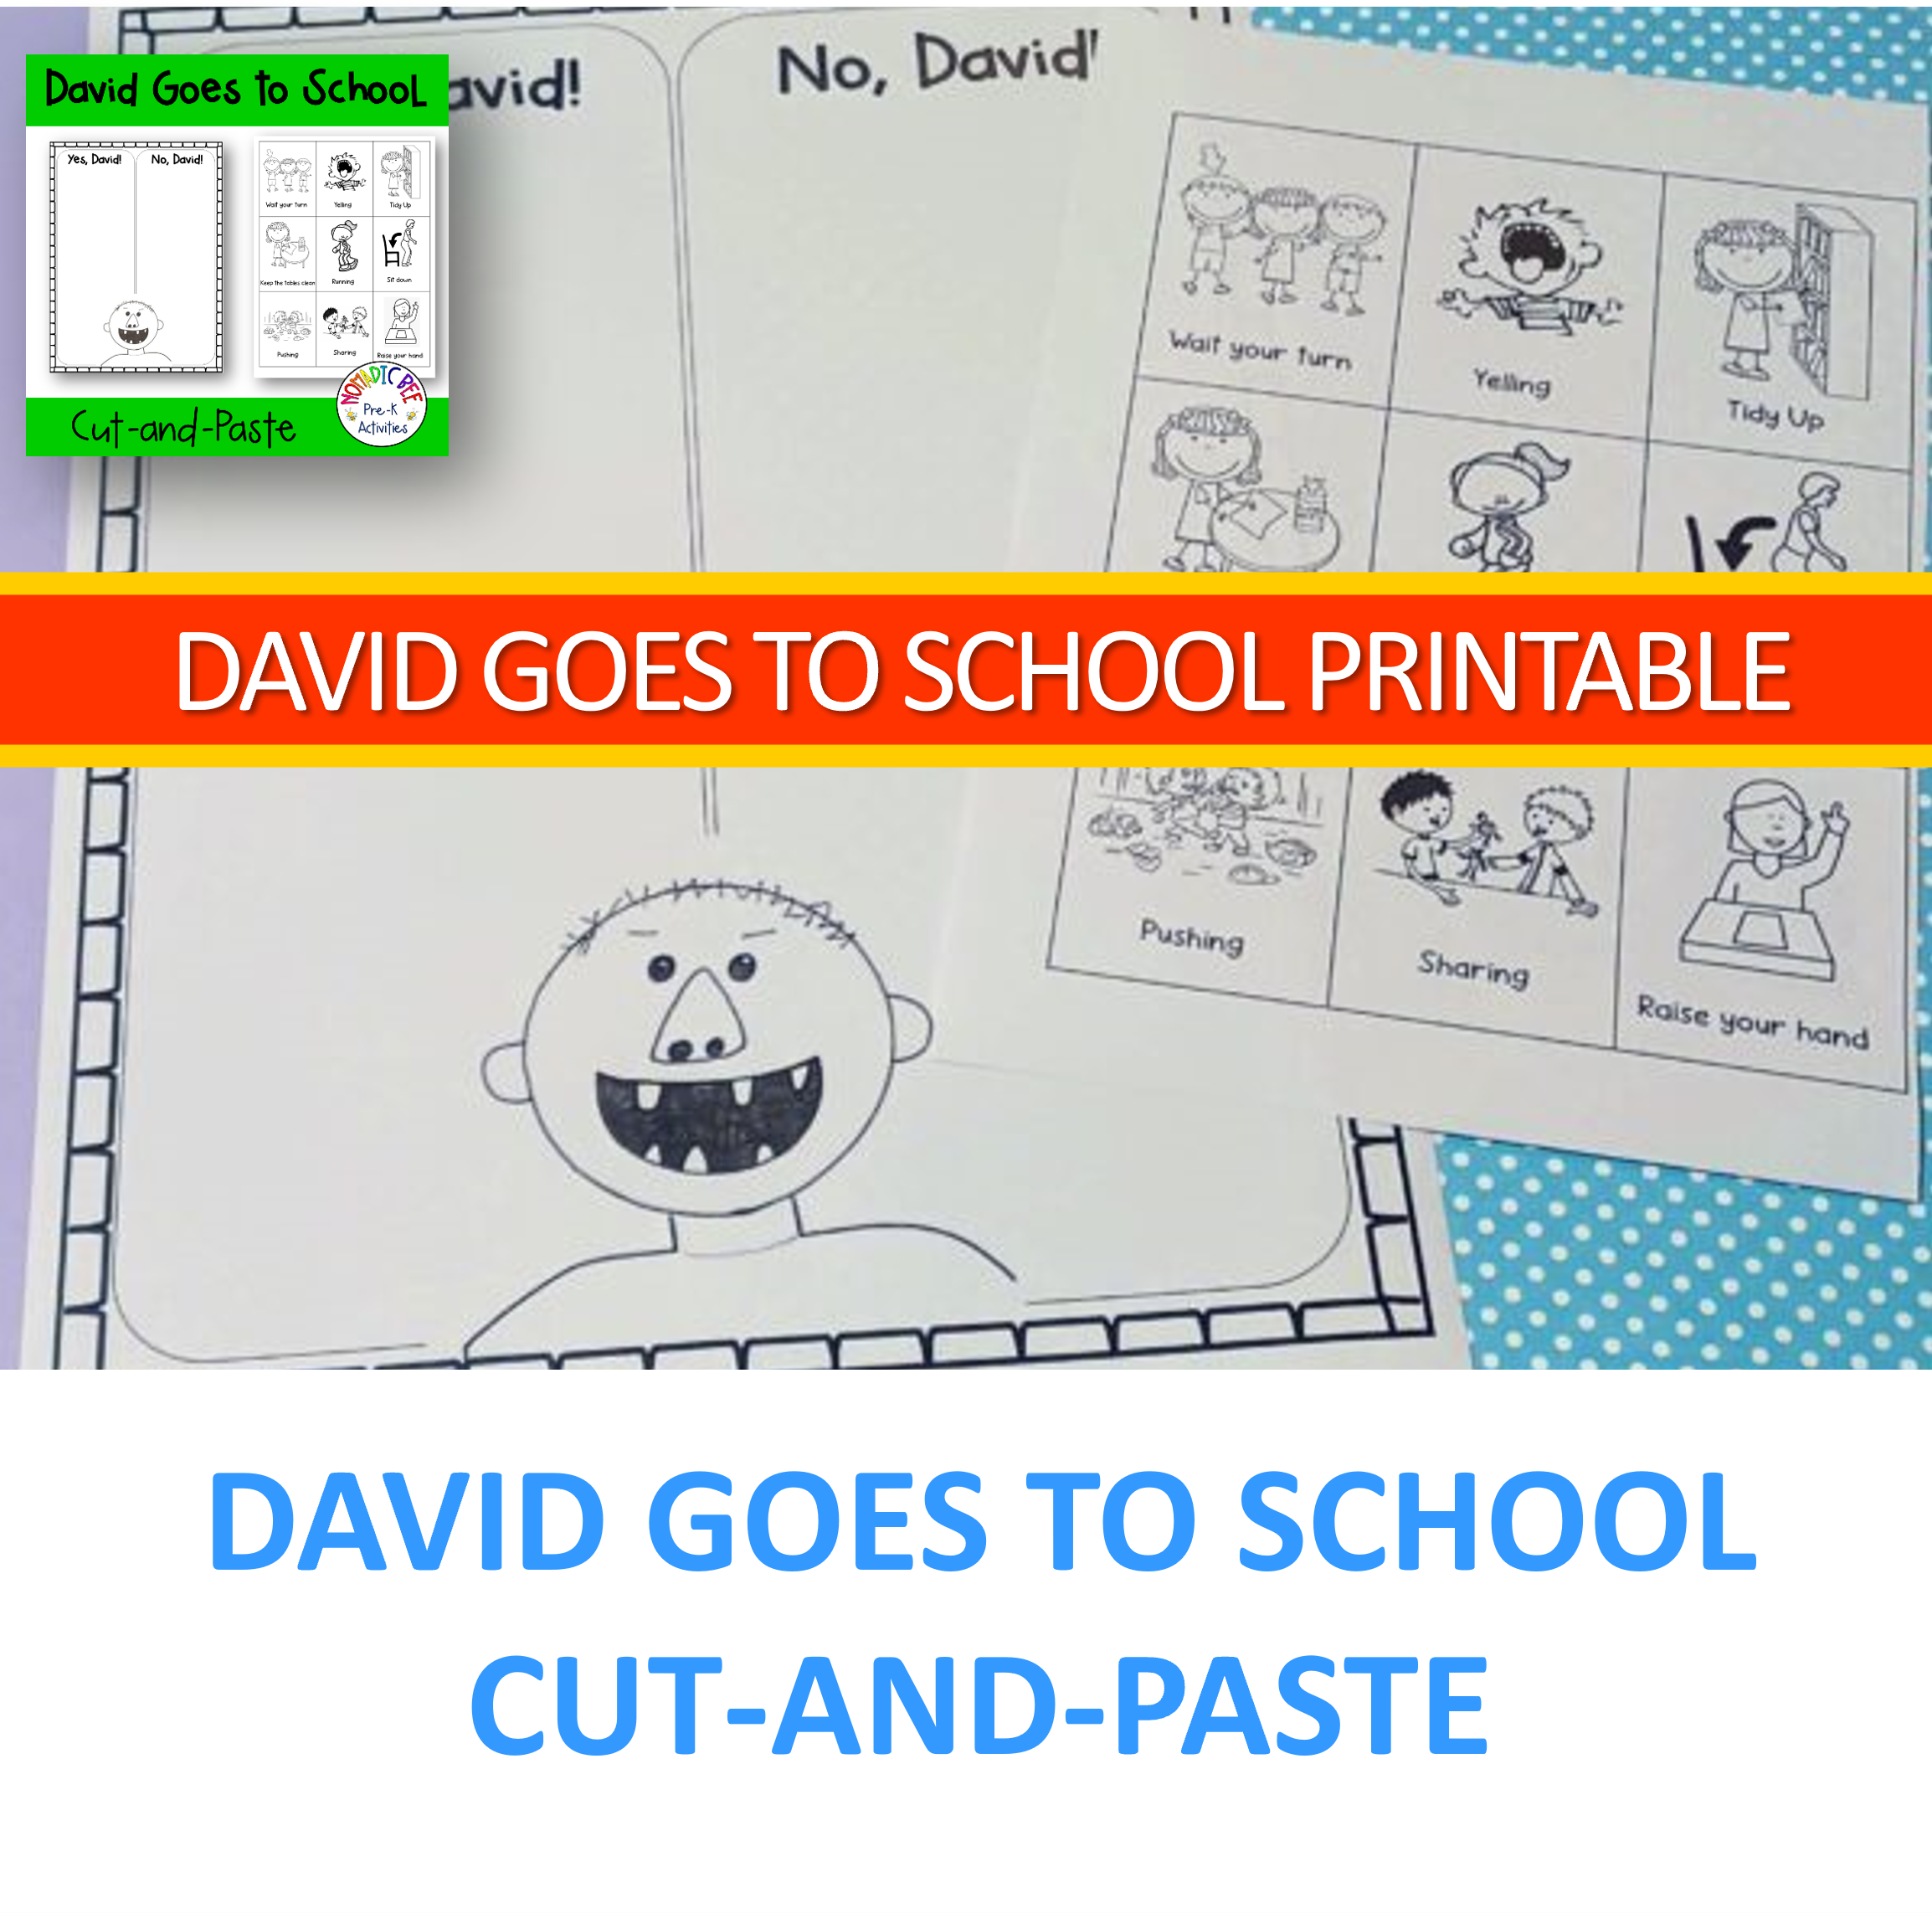 David goes to school cut-and-paste